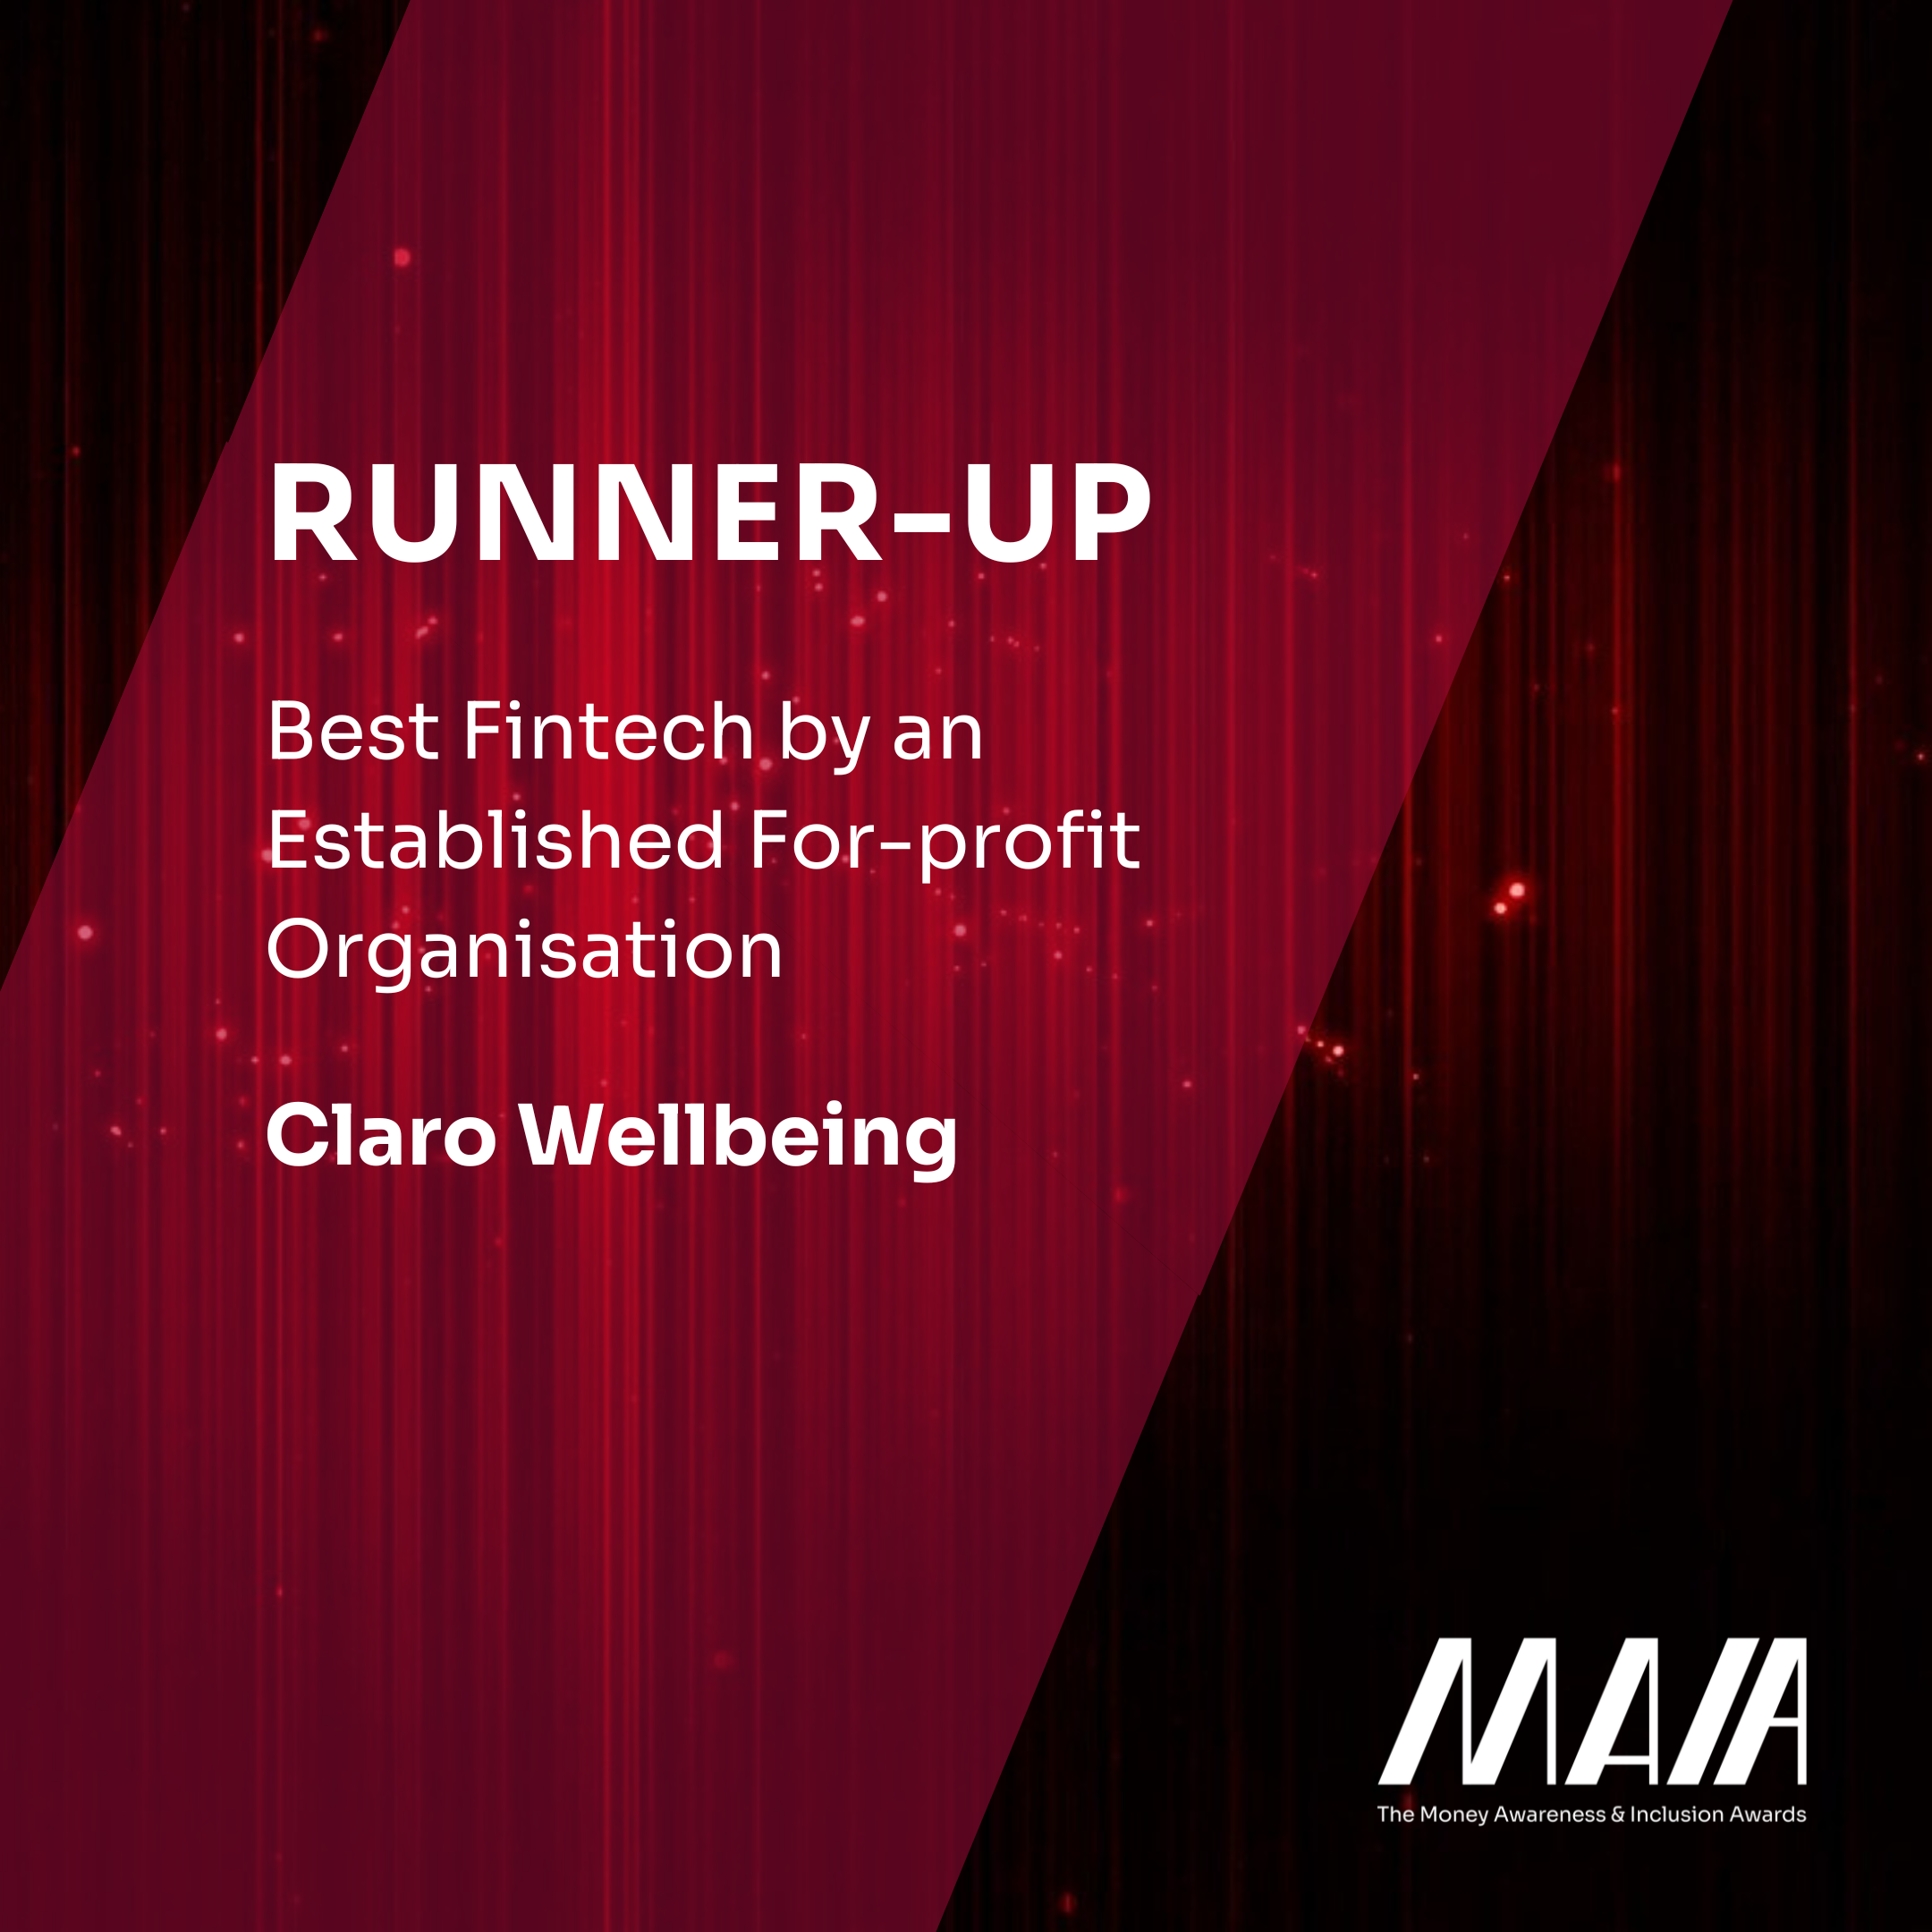 Claro Wellbeing wins runner-up in the Money Awareness & Inclusion Awards